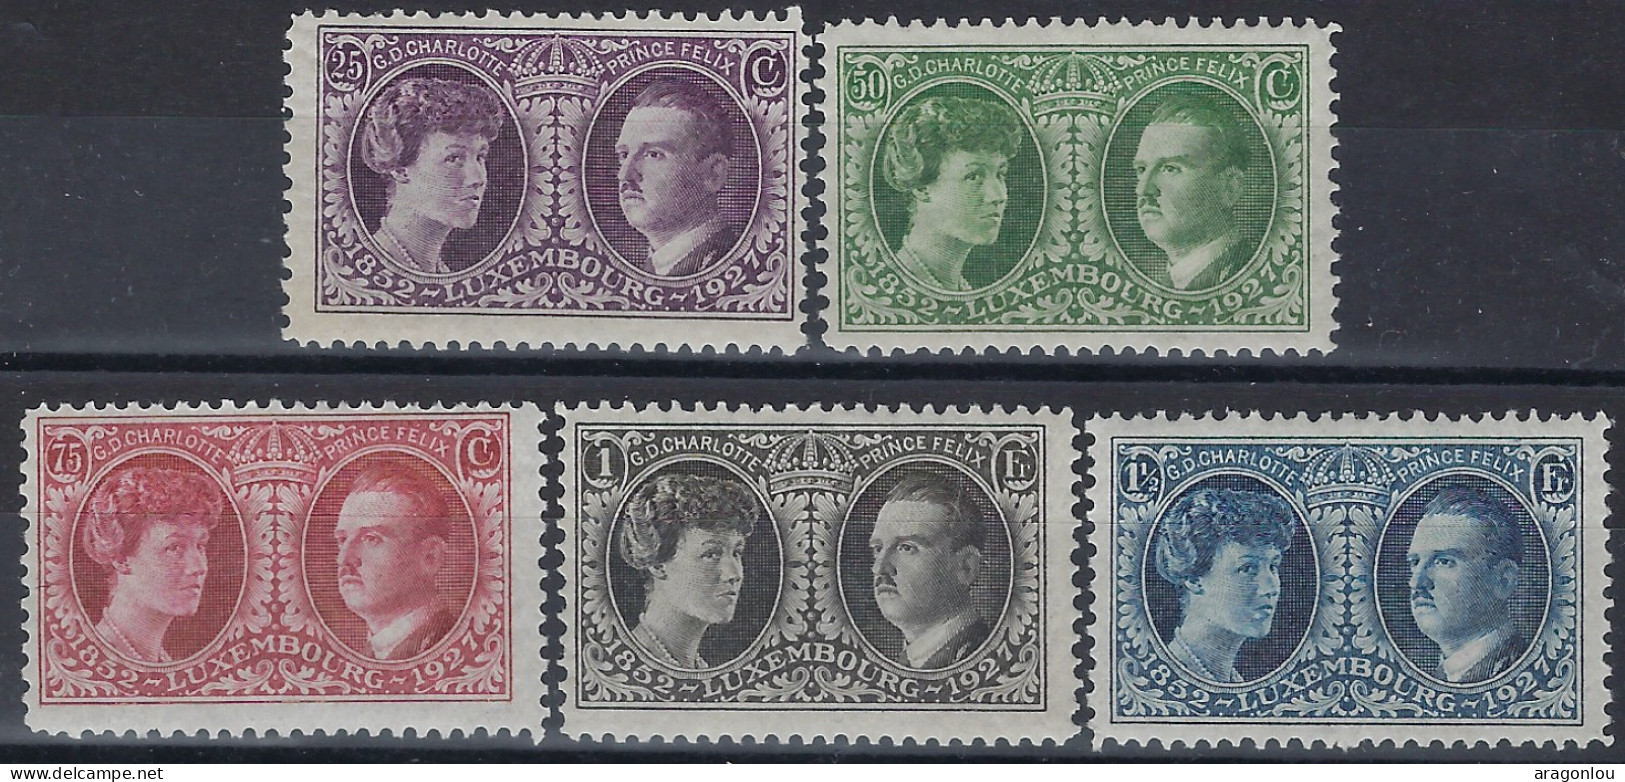 Luxembourg - Luxemburg - Timbre   1927   Couple Grand-Ducal   Série  VC. 20,-  MNH** - Blocs & Hojas